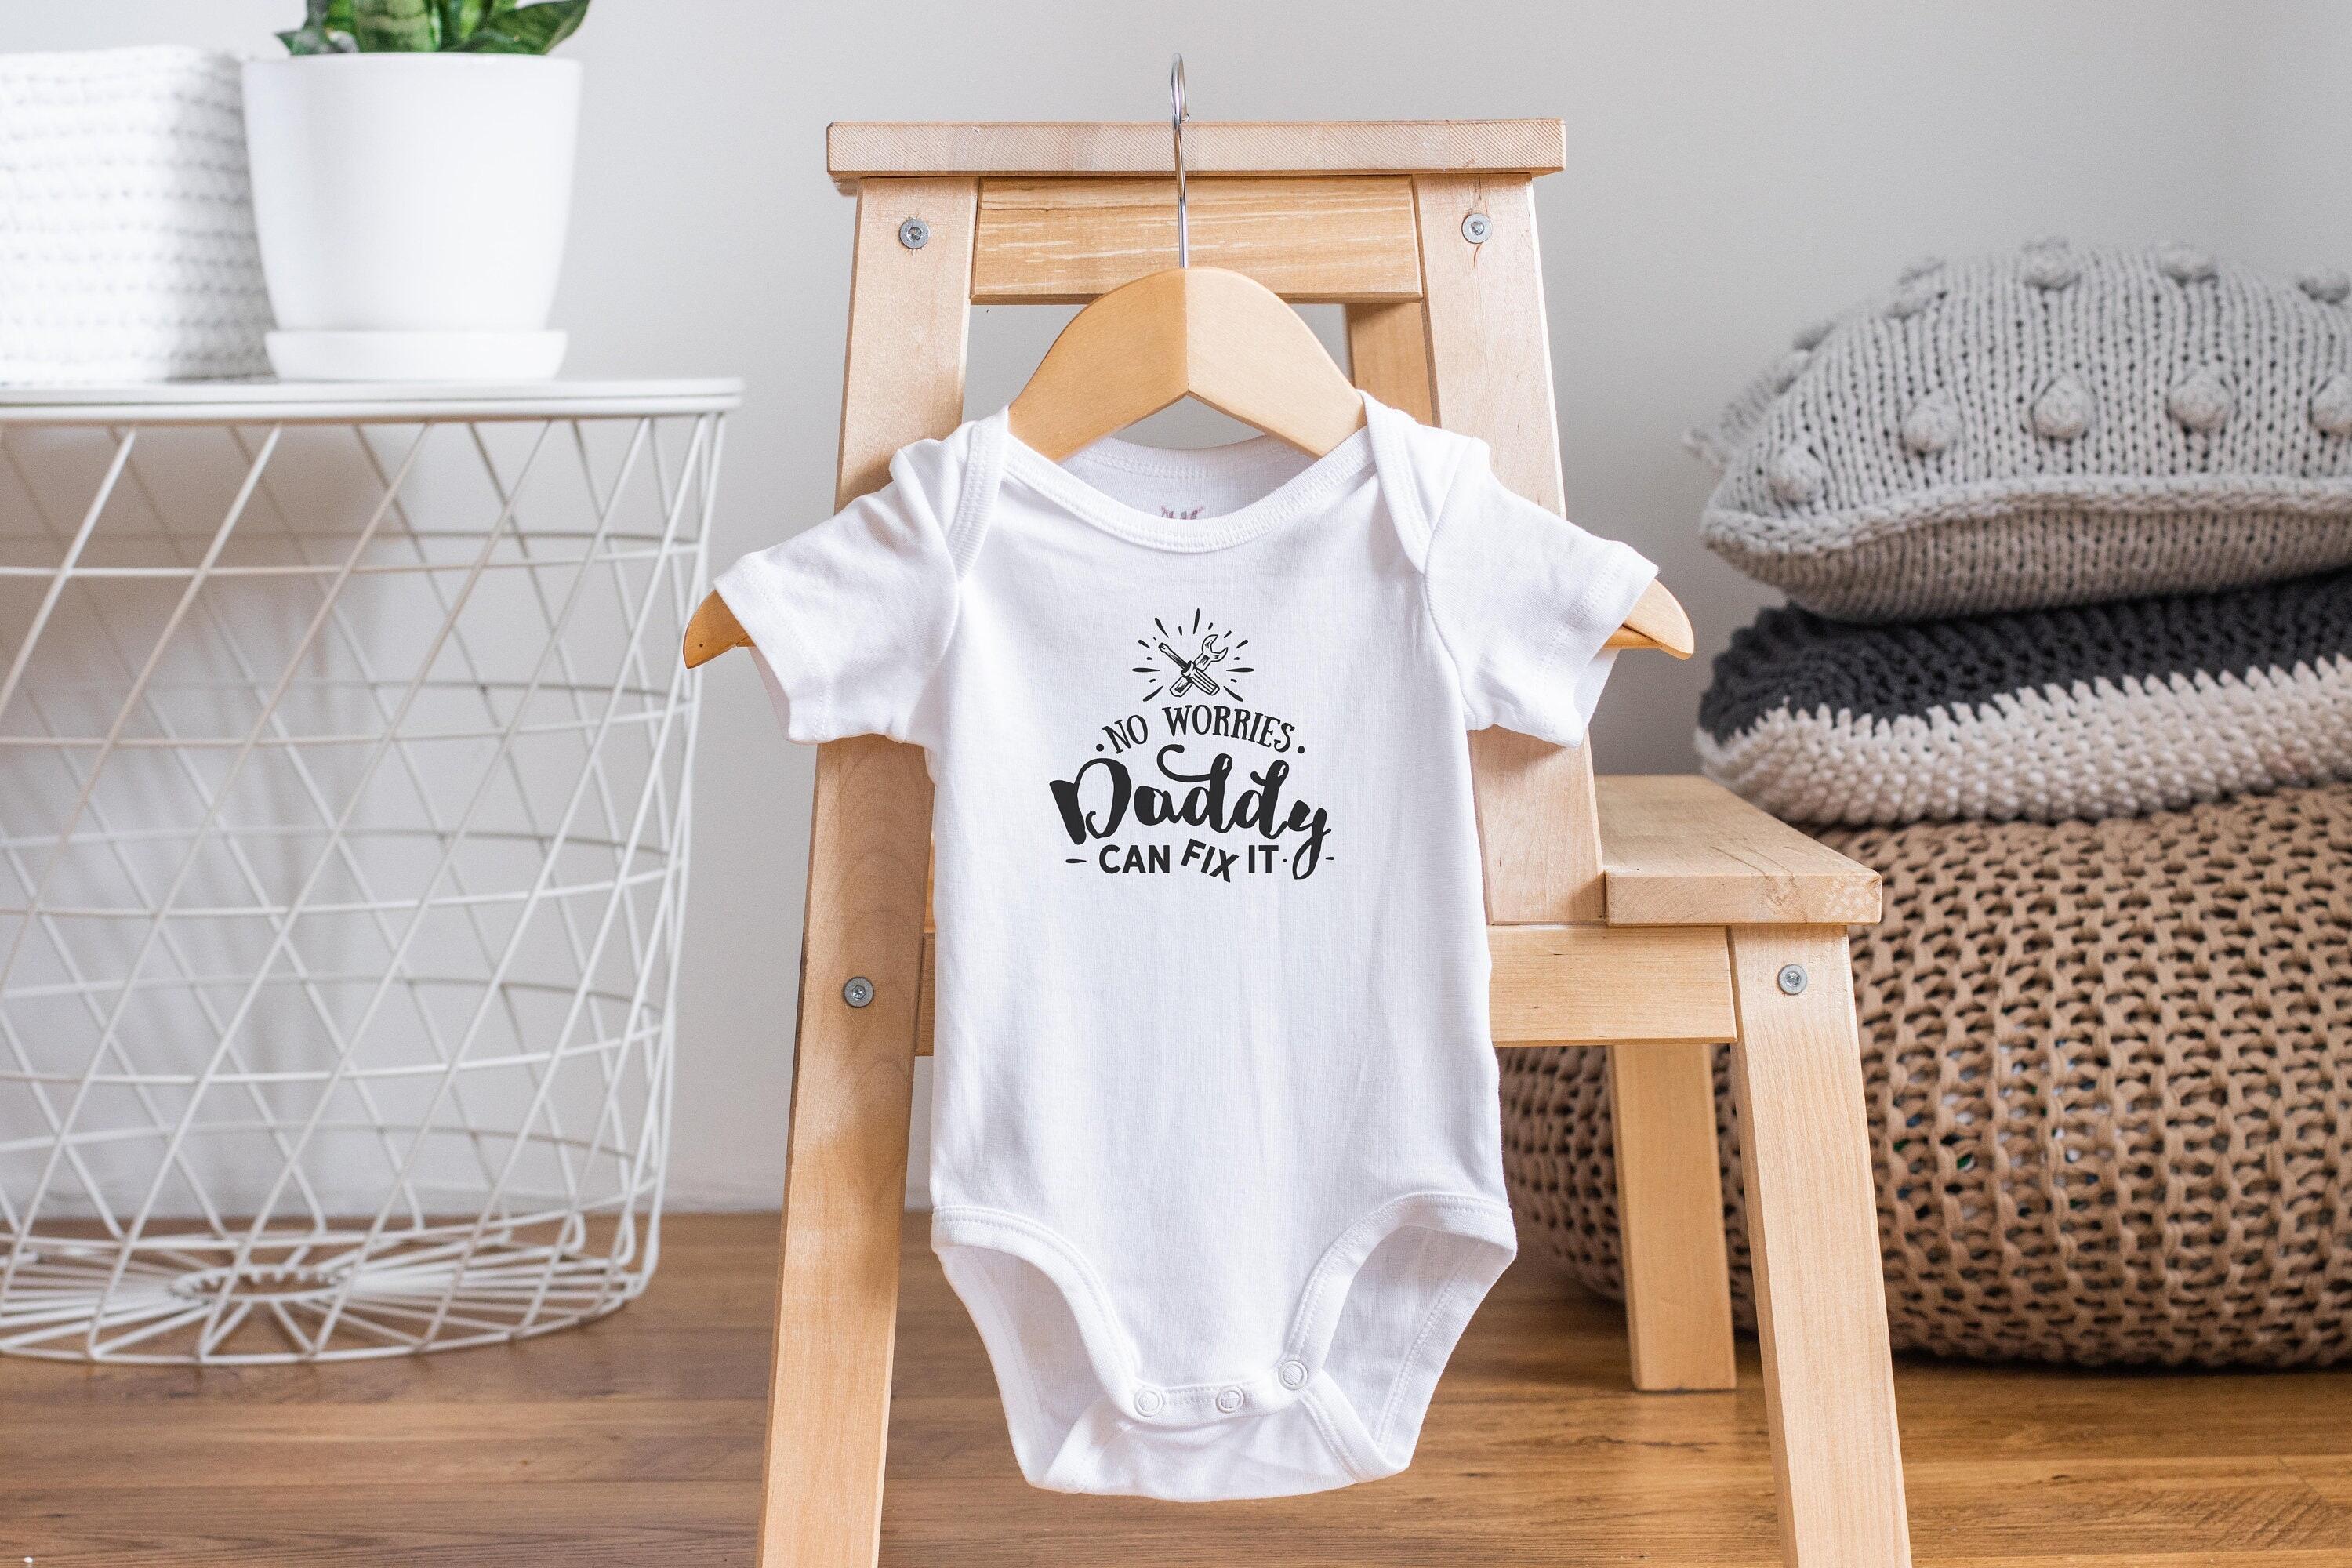 Coming Soon Gerber Onesie Pregnancy Announcement to Daddy!